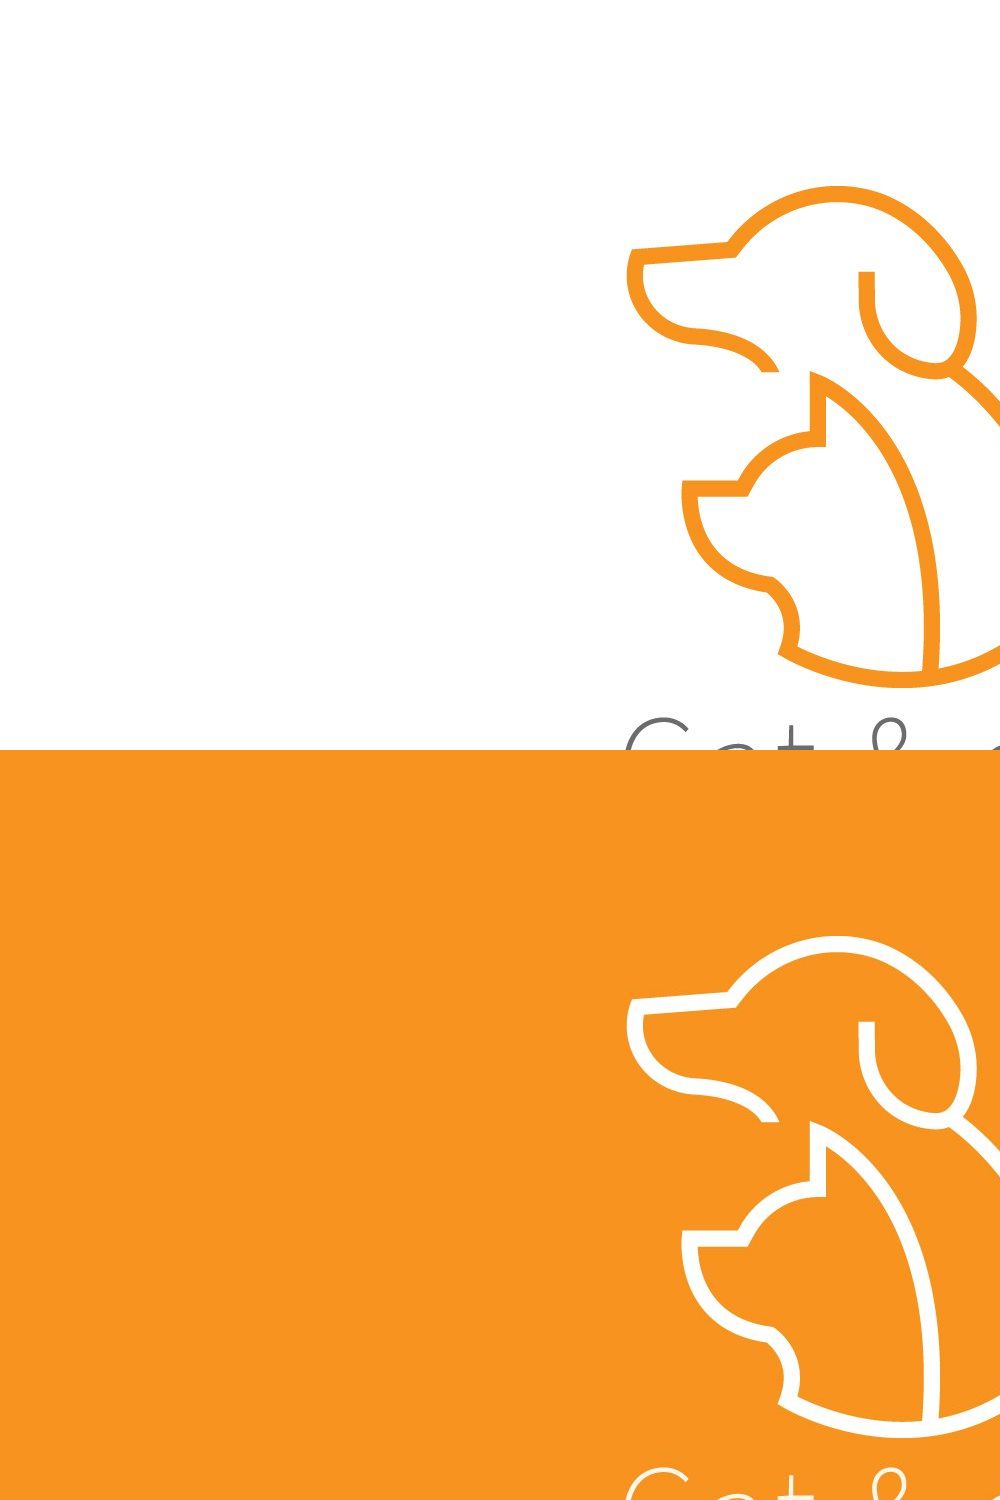 Cat and dog logo pinterest preview image.